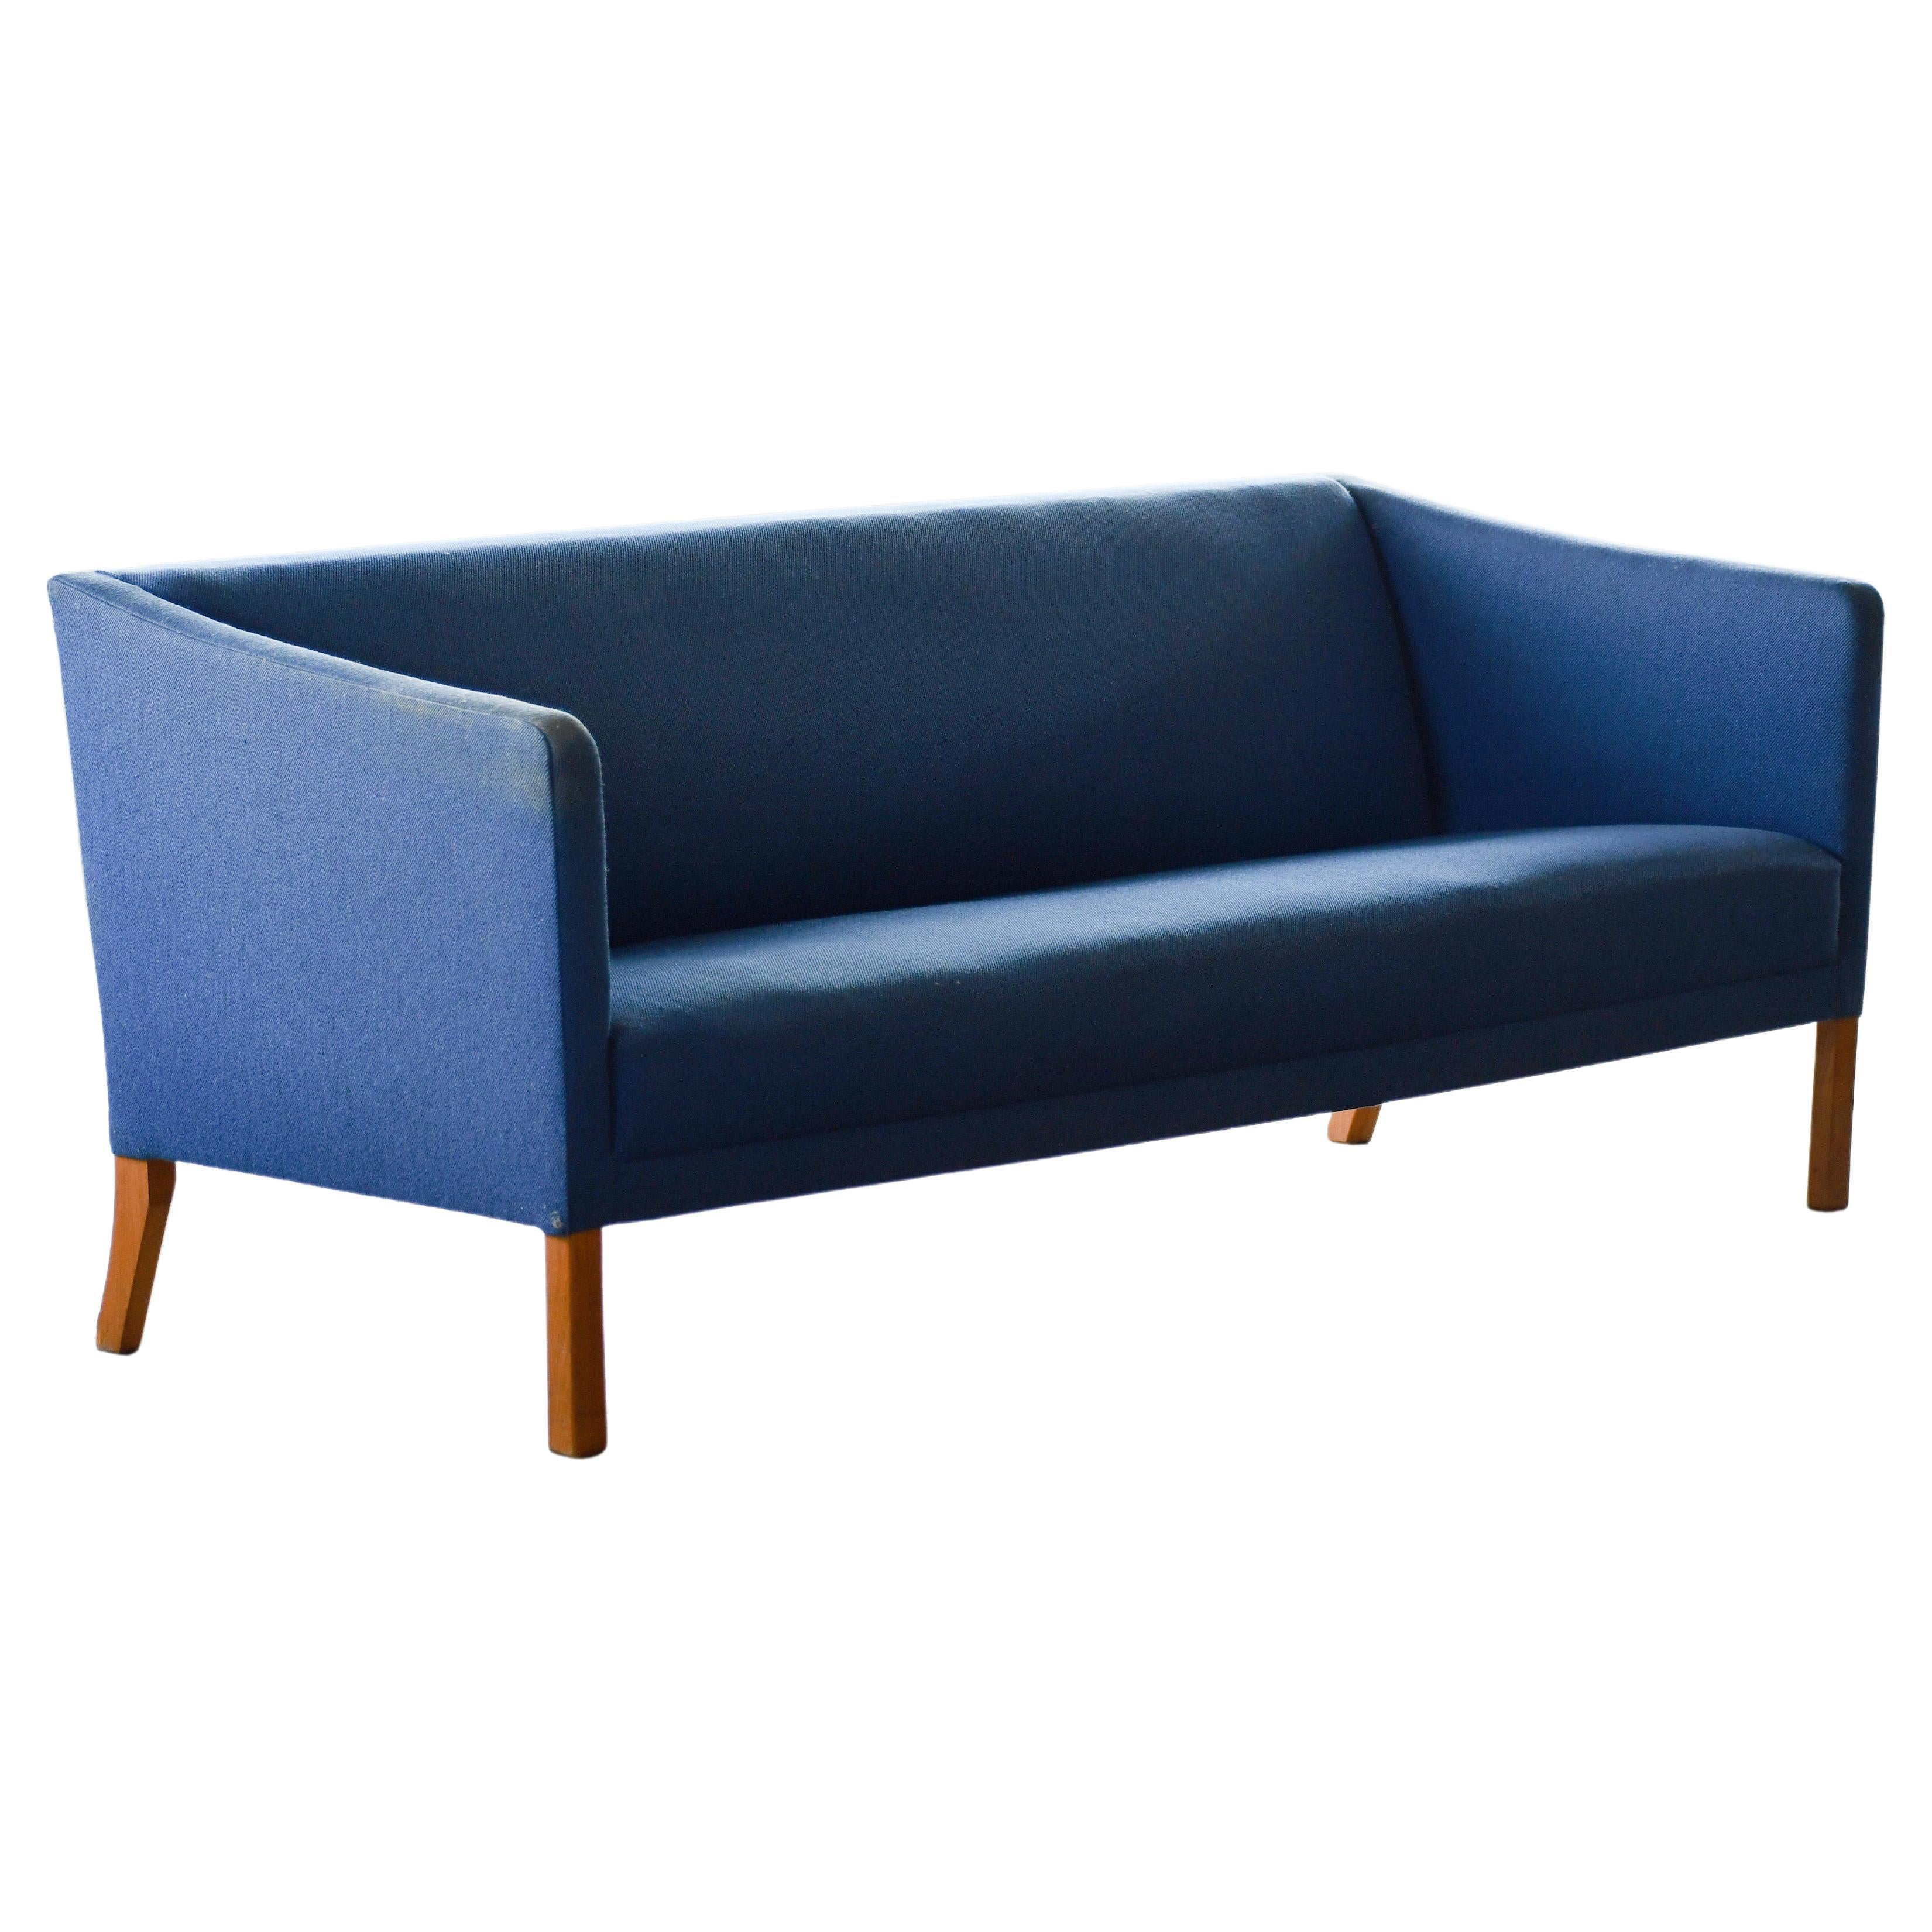 Classic Danish Midcentury Sofa in the Style of Grete Jalk  For Sale